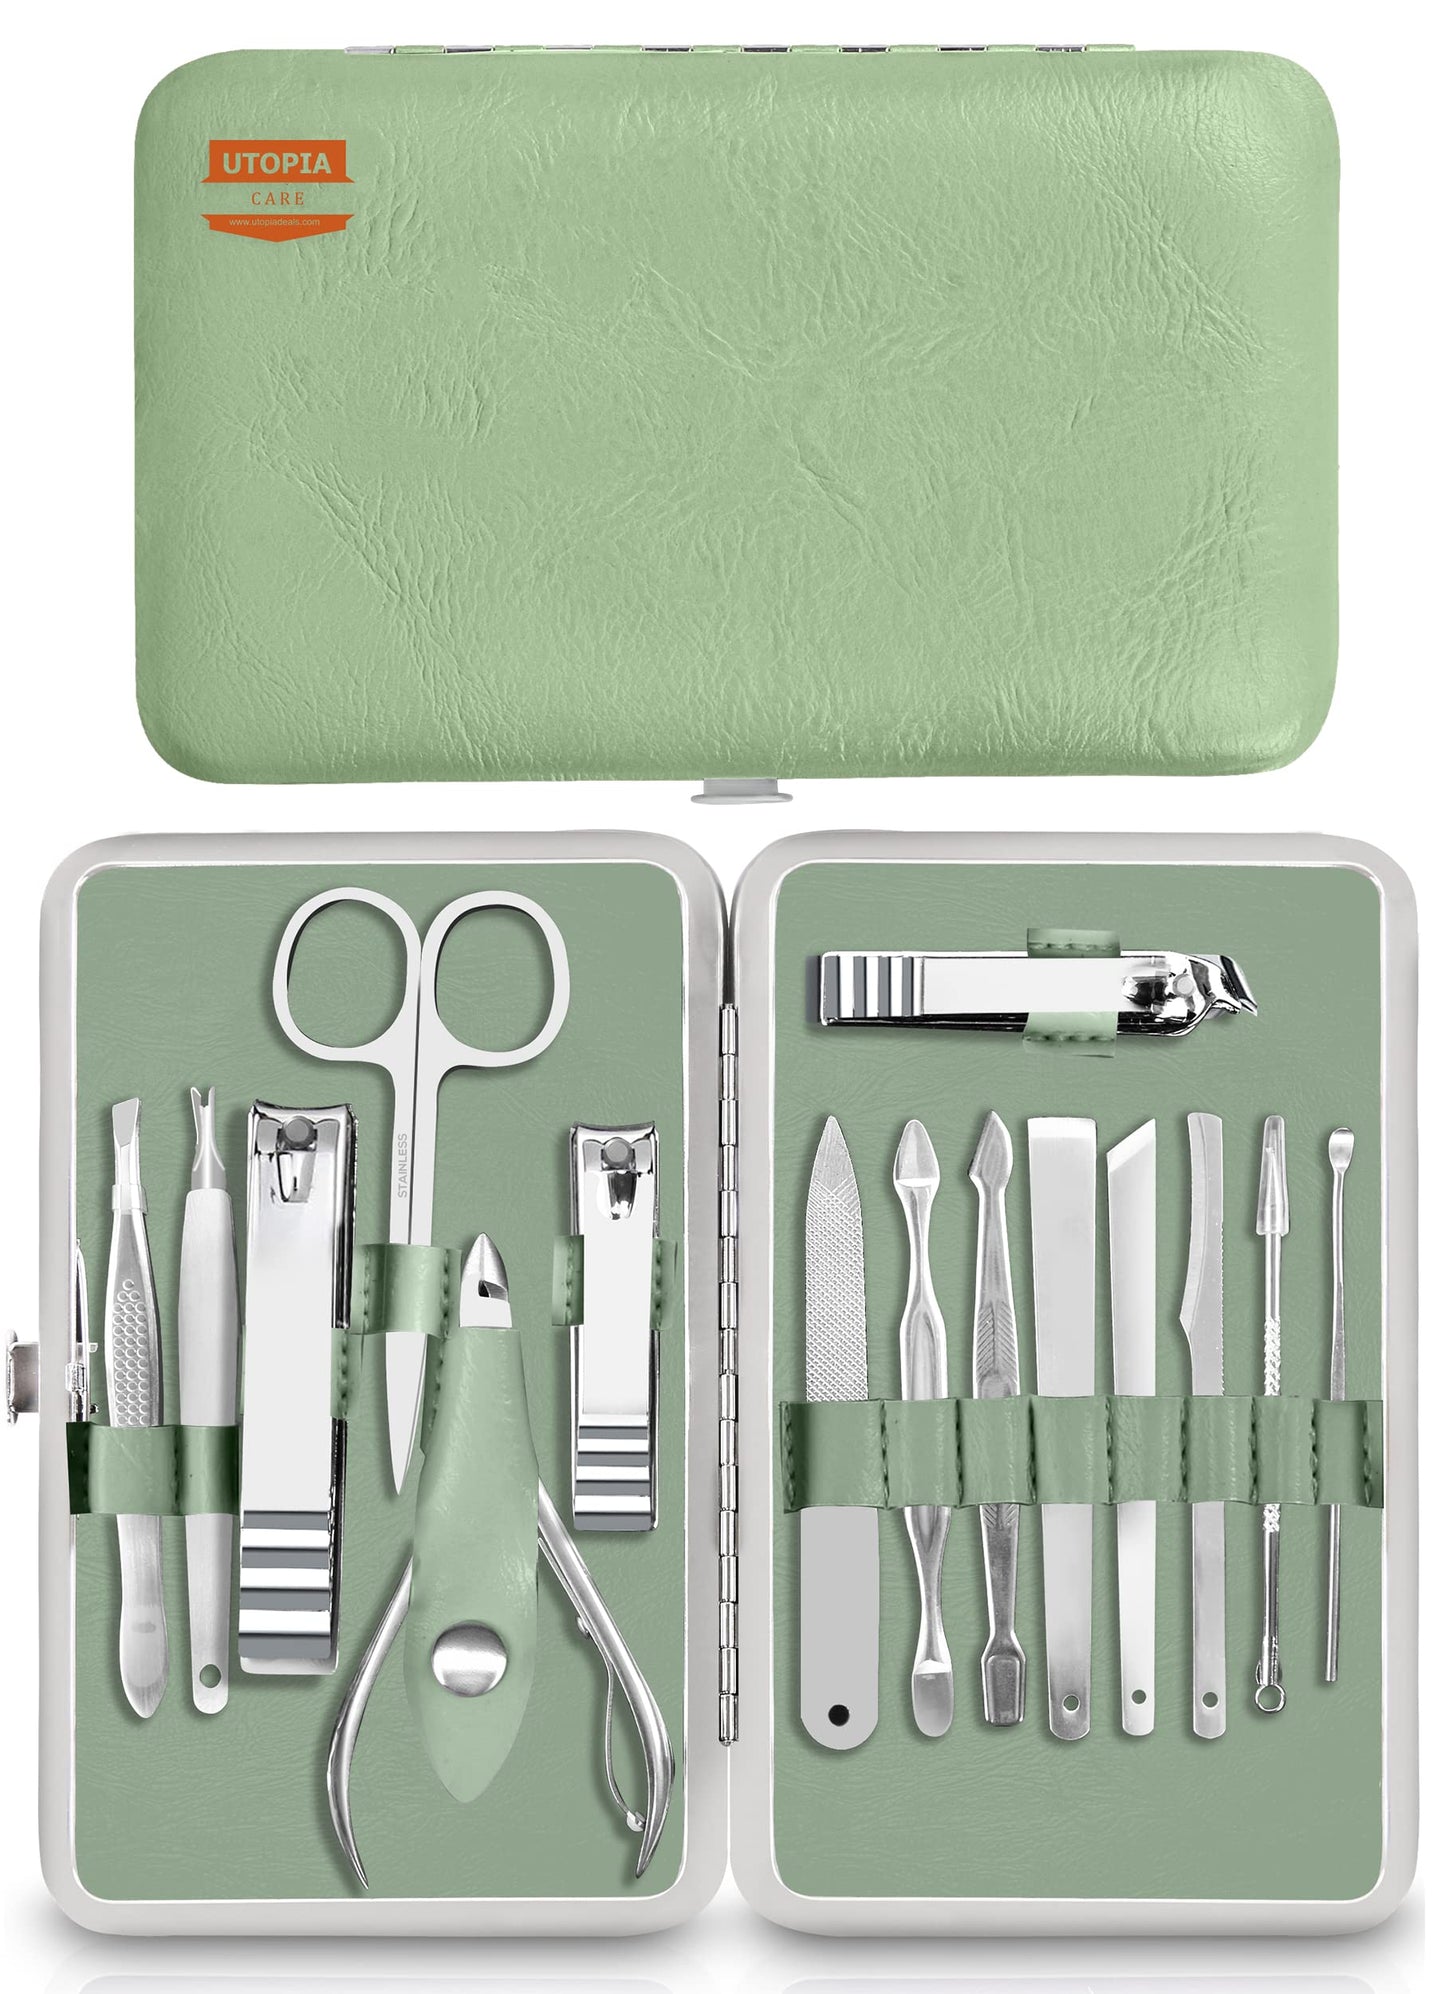 Utopia Care Manicure Kit Nail Clippers for Men and Women,15 Piece Professional Stainless Steel Manicure Set with Nail Kit, Pedicure Kit and Nail Care Grooming Kit with Luxurious Travel Case - Green